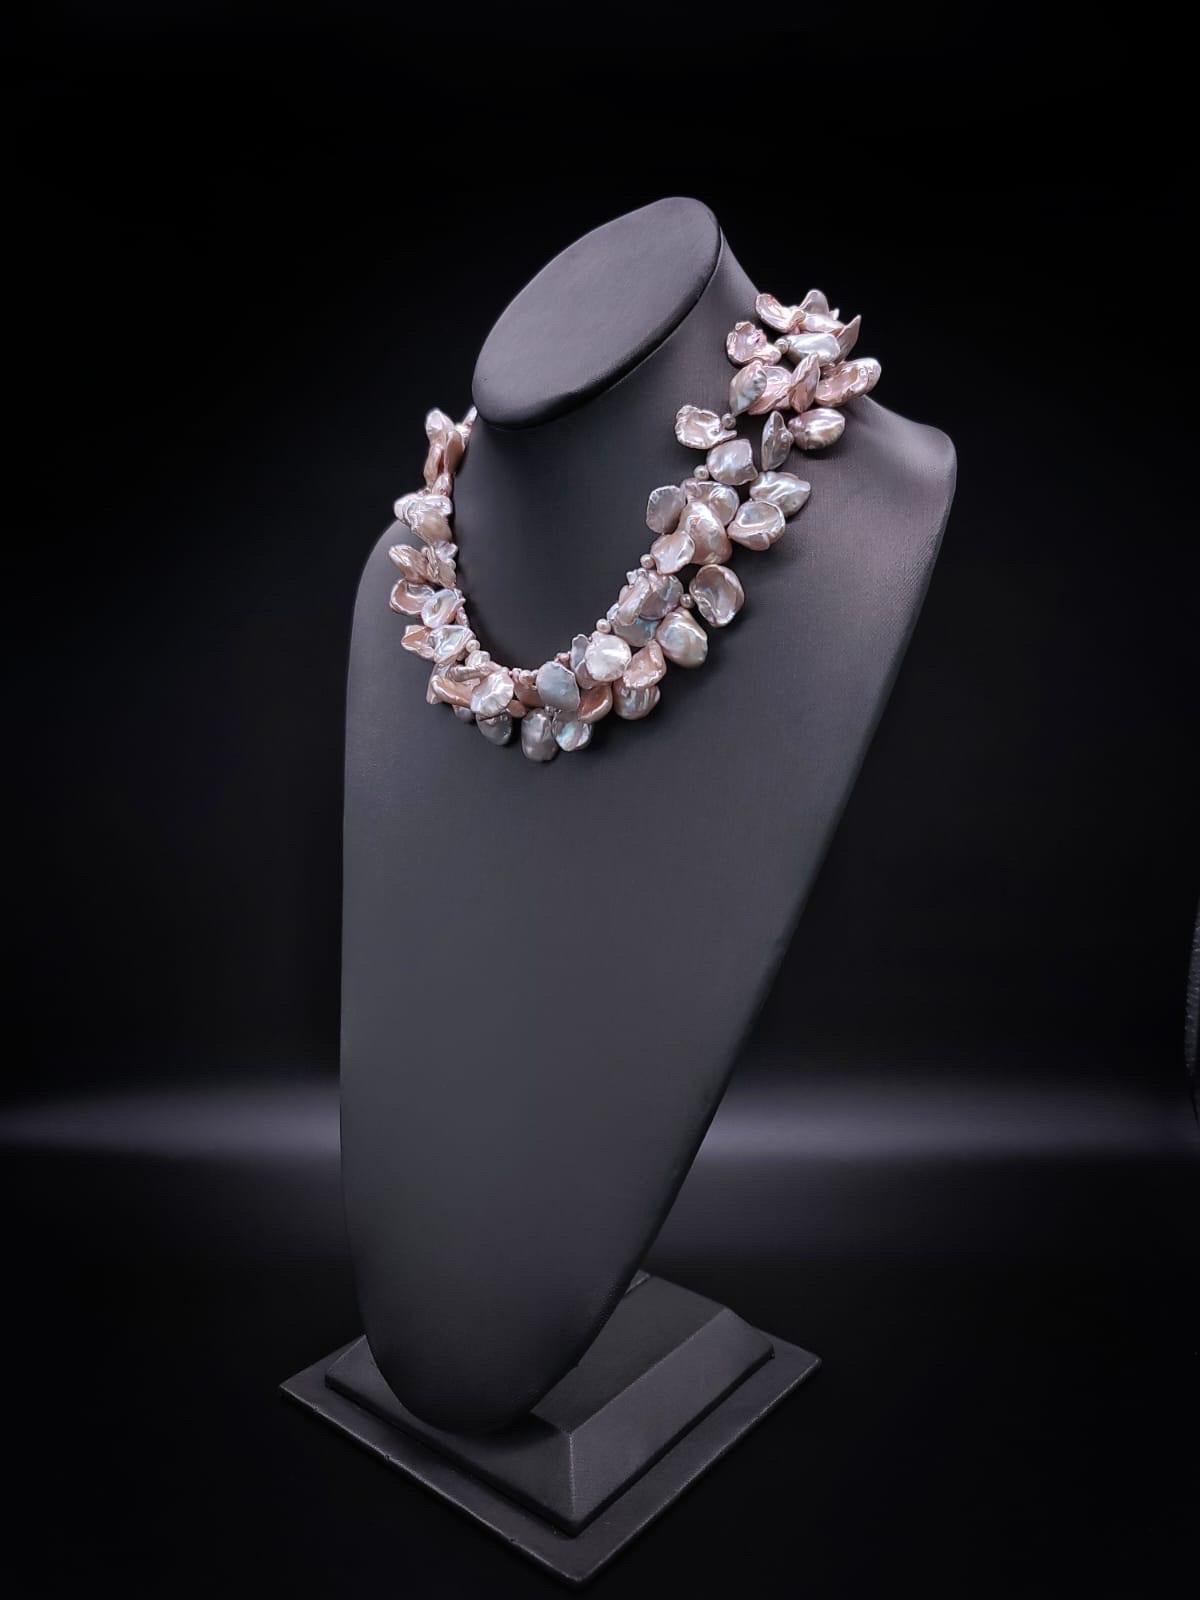 Mixed Cut A.Jeschel Elegant Keshi pearl necklace with a vintage Italian clasp. For Sale